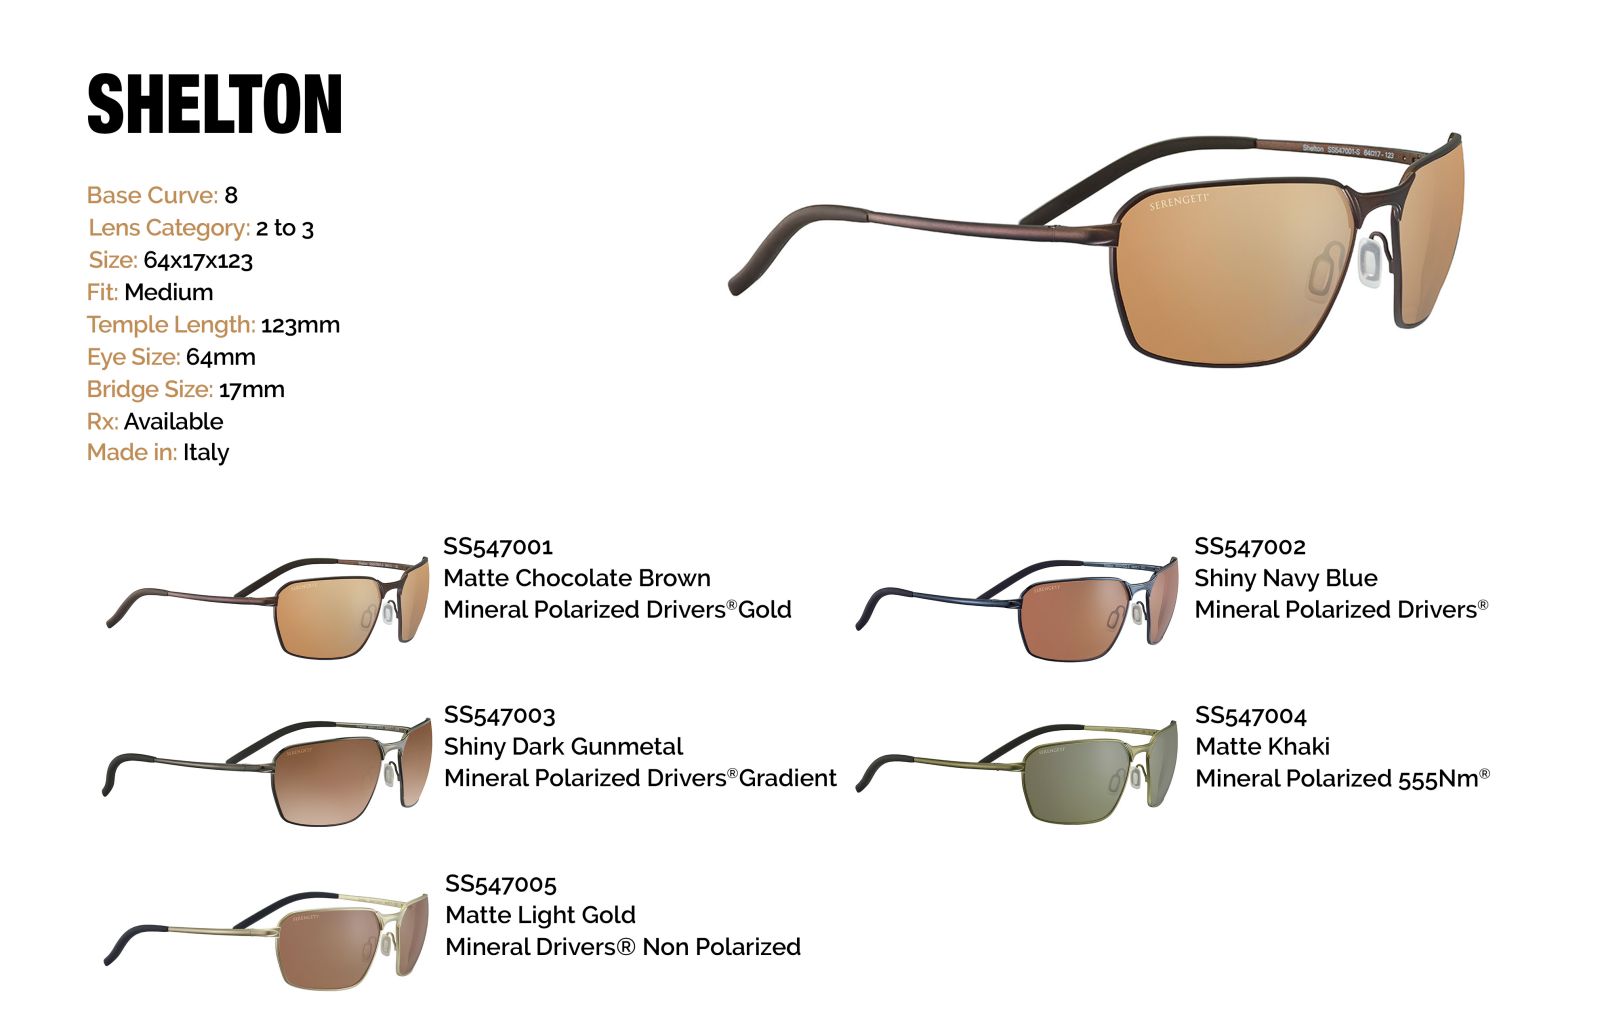 High-Index Lenses - All About Vision